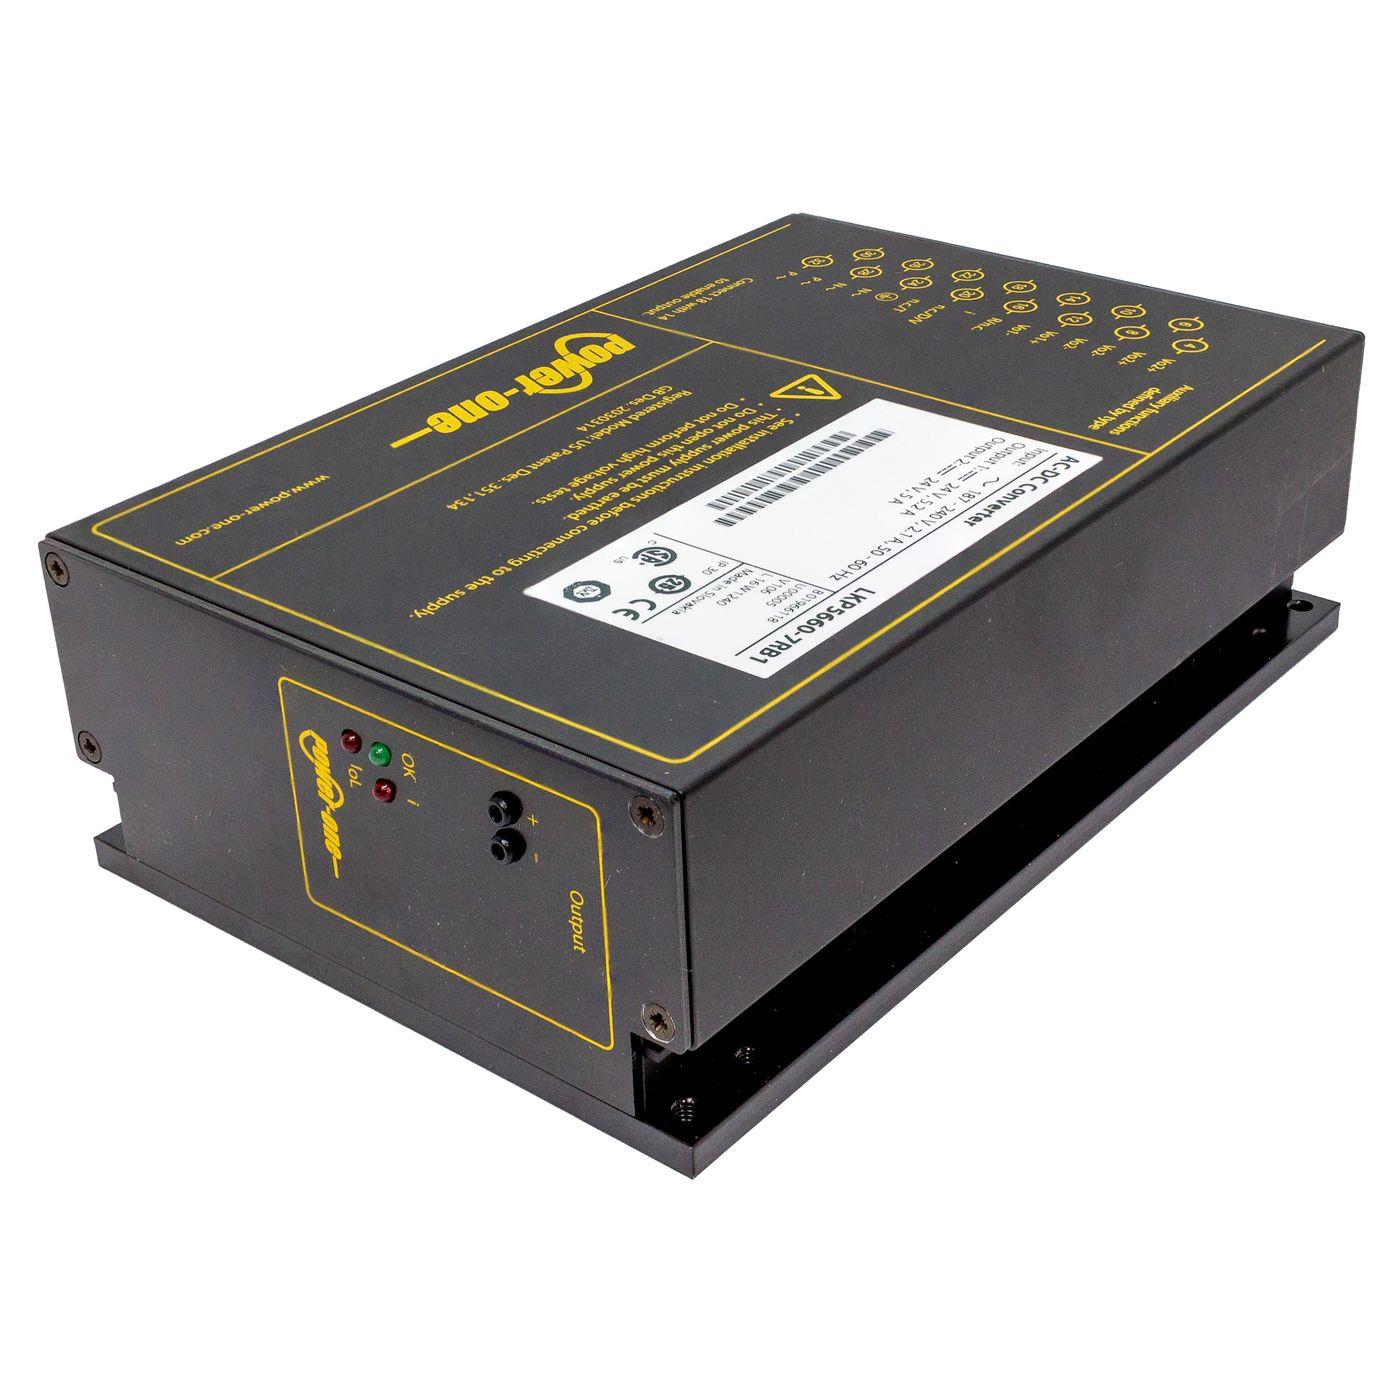 Power-One LKP5660-7RB1 250W 24V 10,2A Industrial power supply